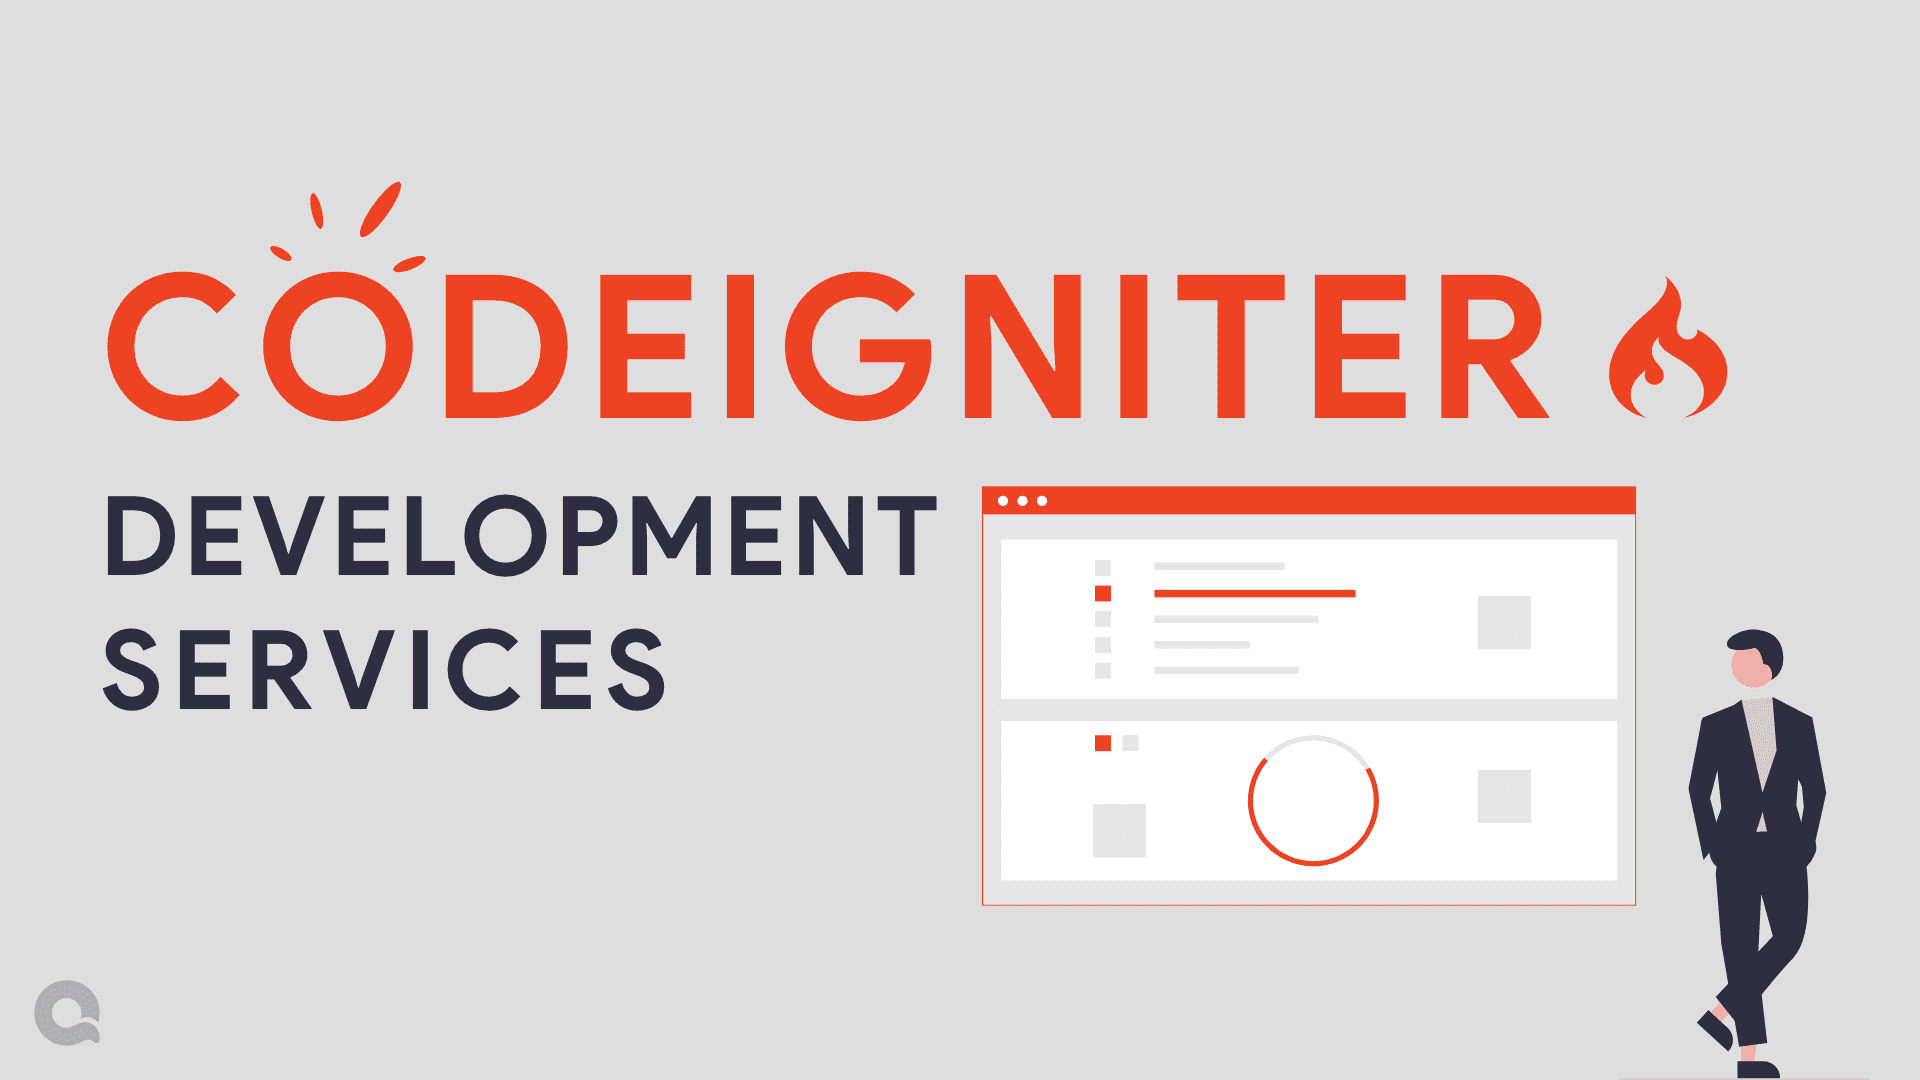 CodeIgniter Development Services for Your Business